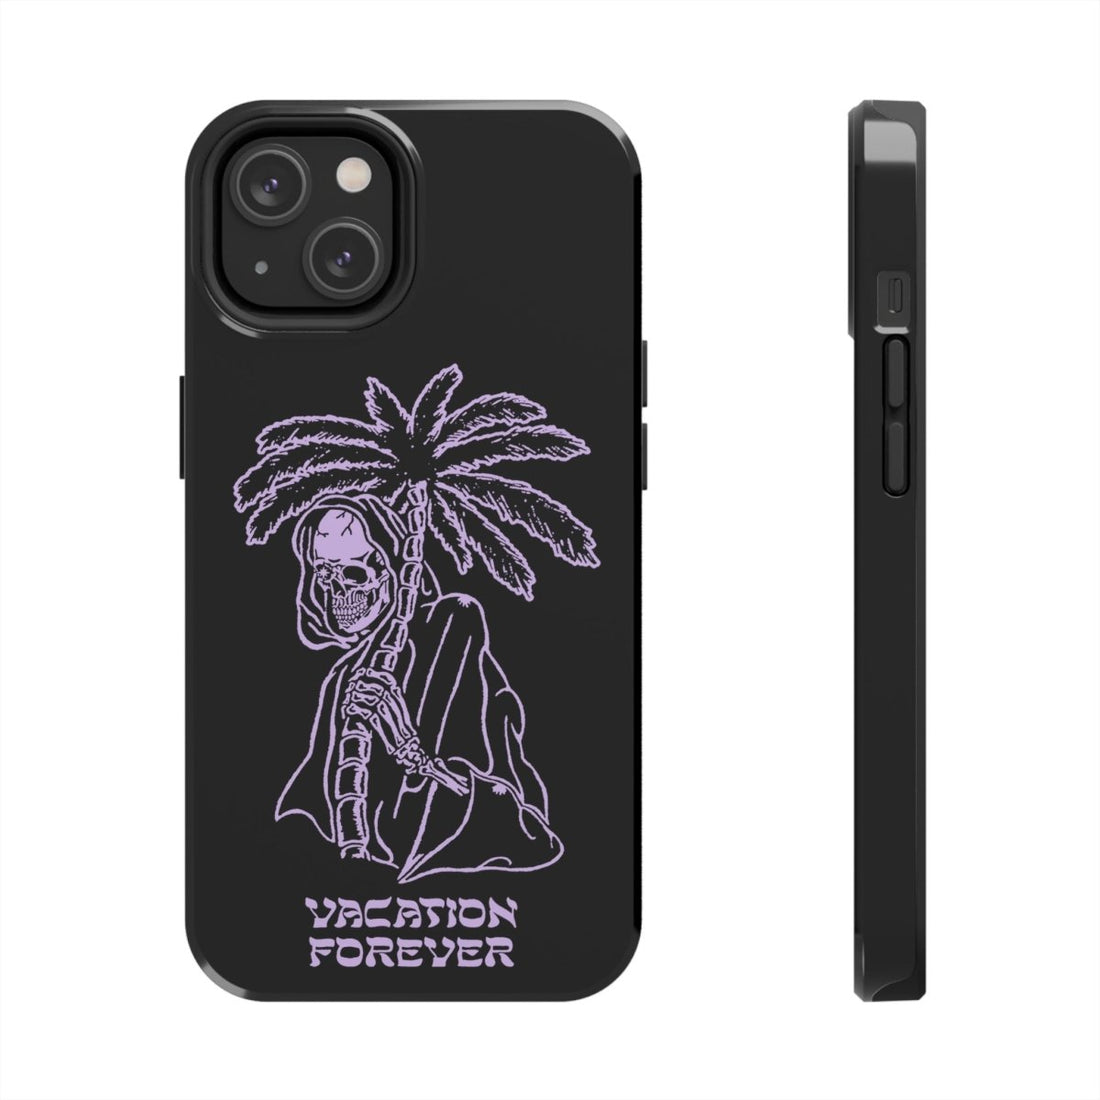 Vacation Forever Tattoo Inspired Tough Phone Cases